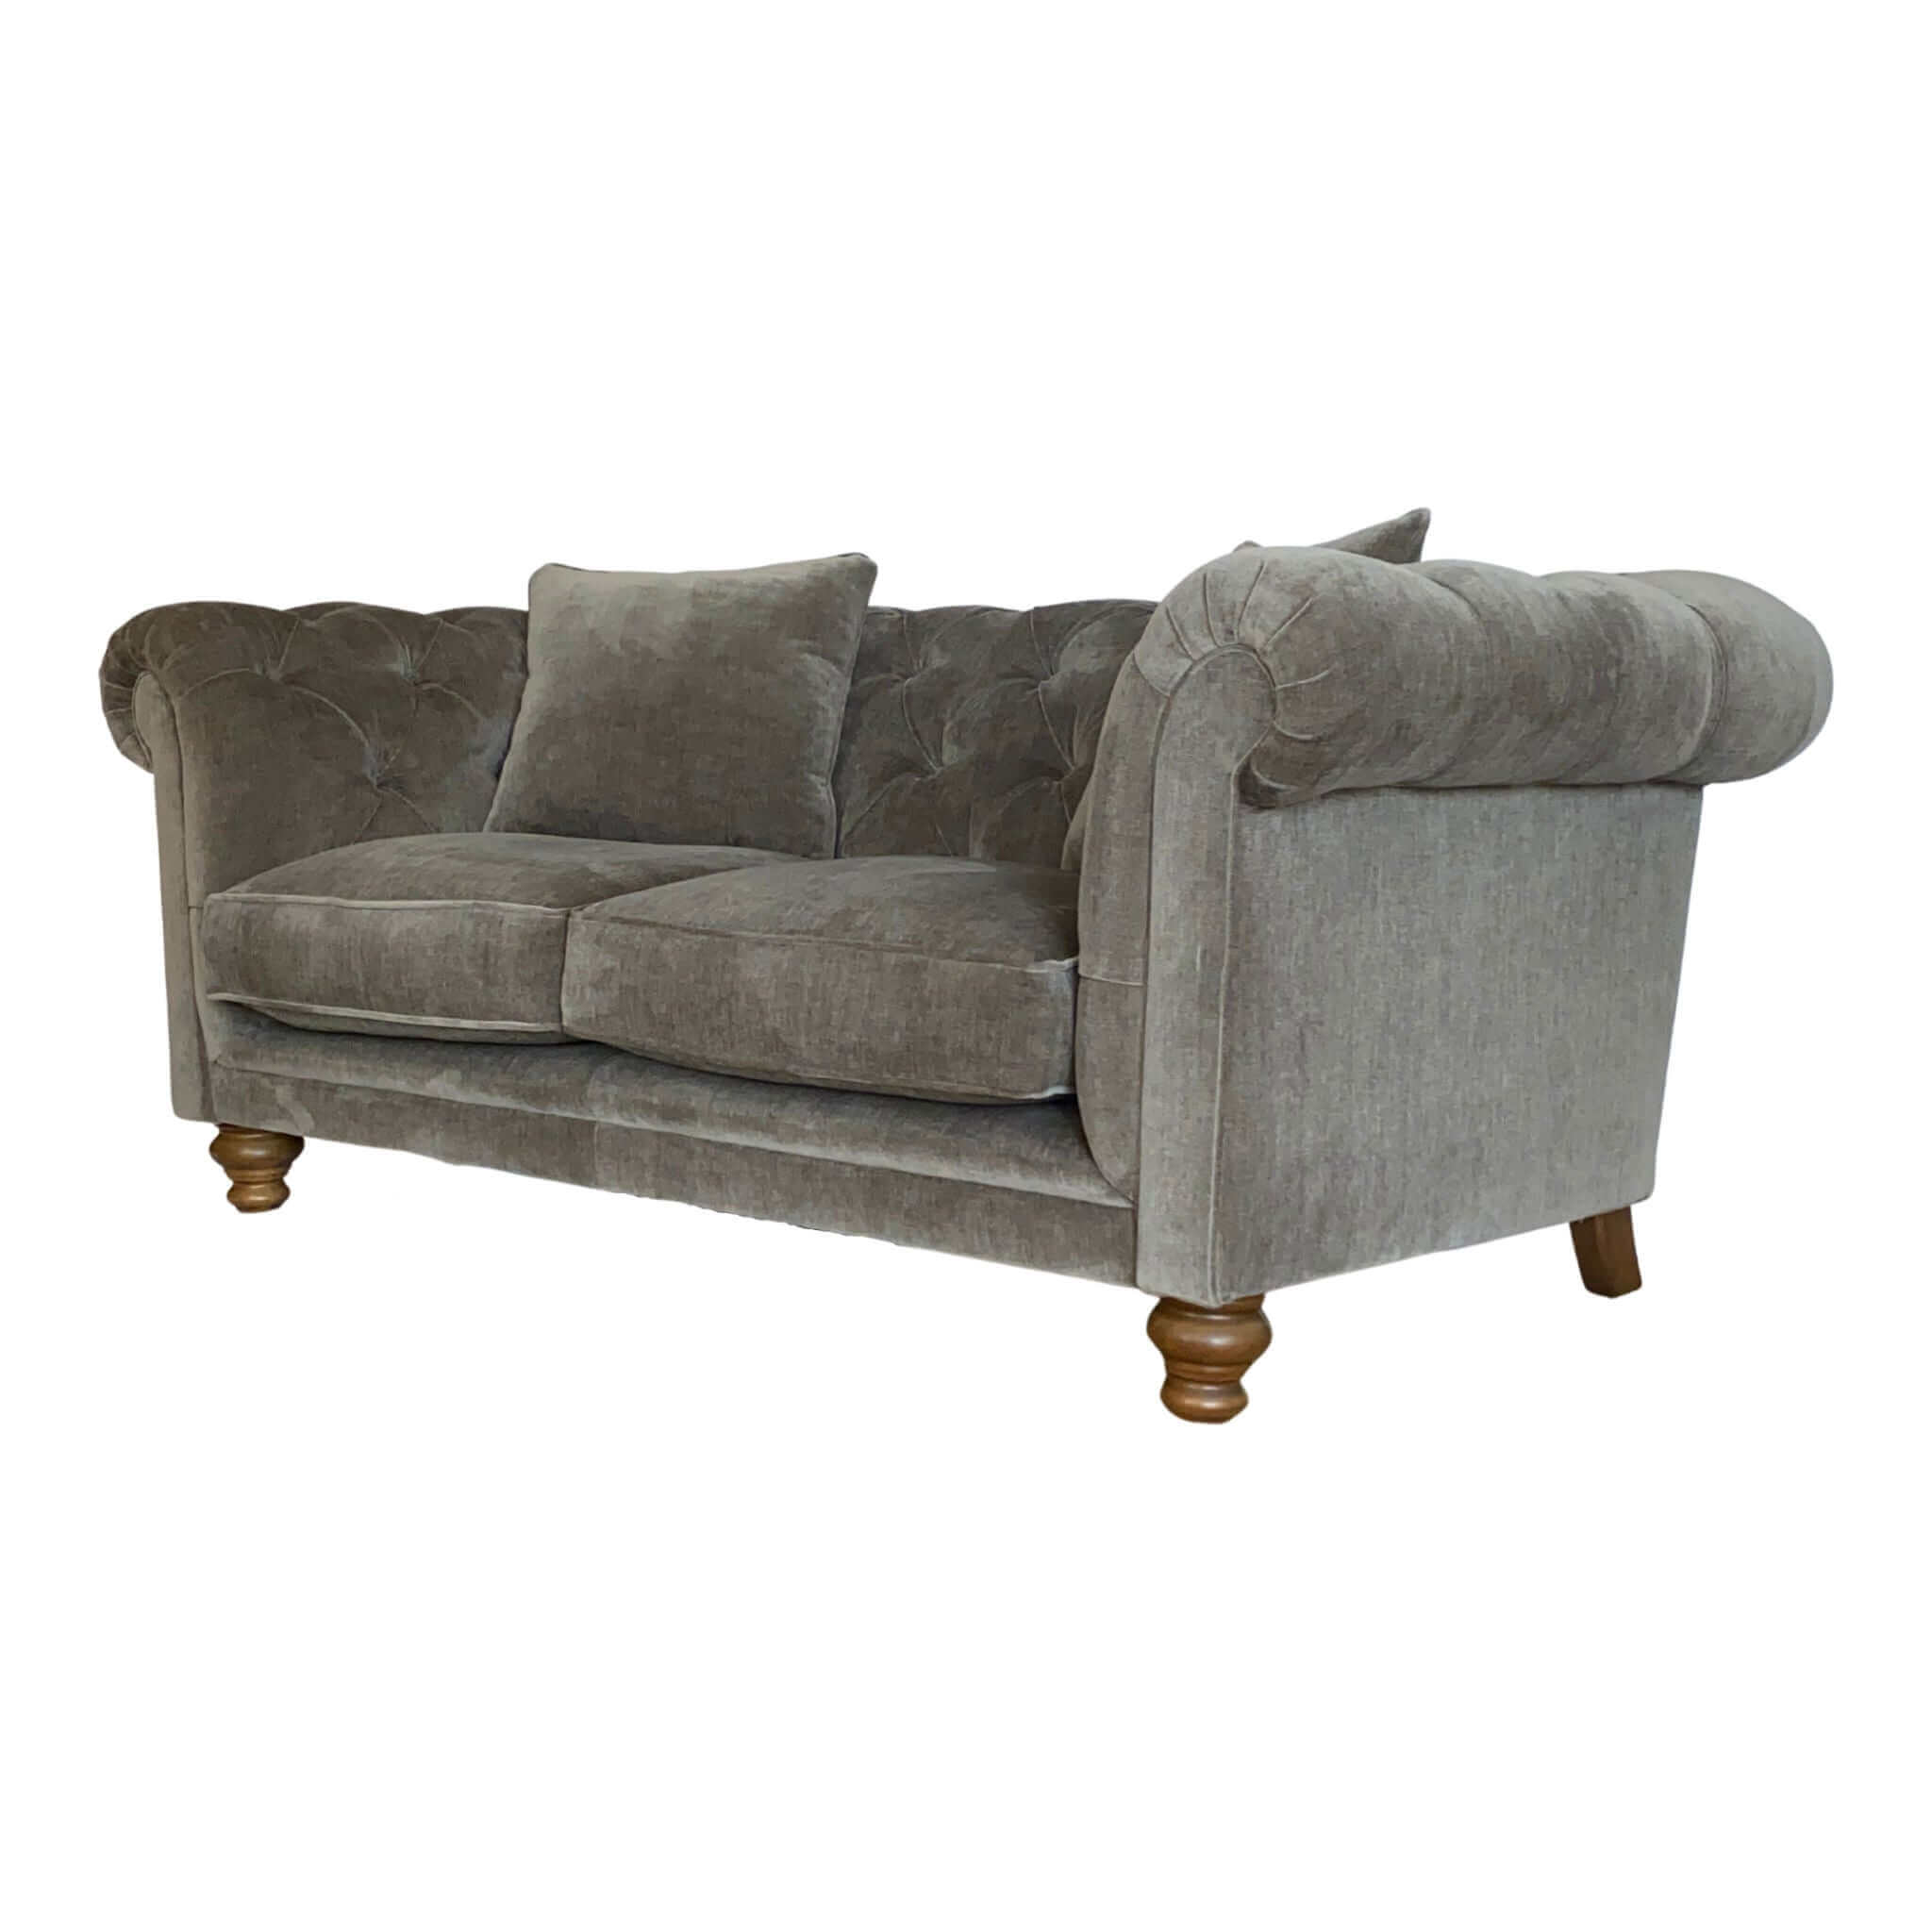 Edgecombe 2-Seat Chesterfield Sofa - escapologyhome.co.uk